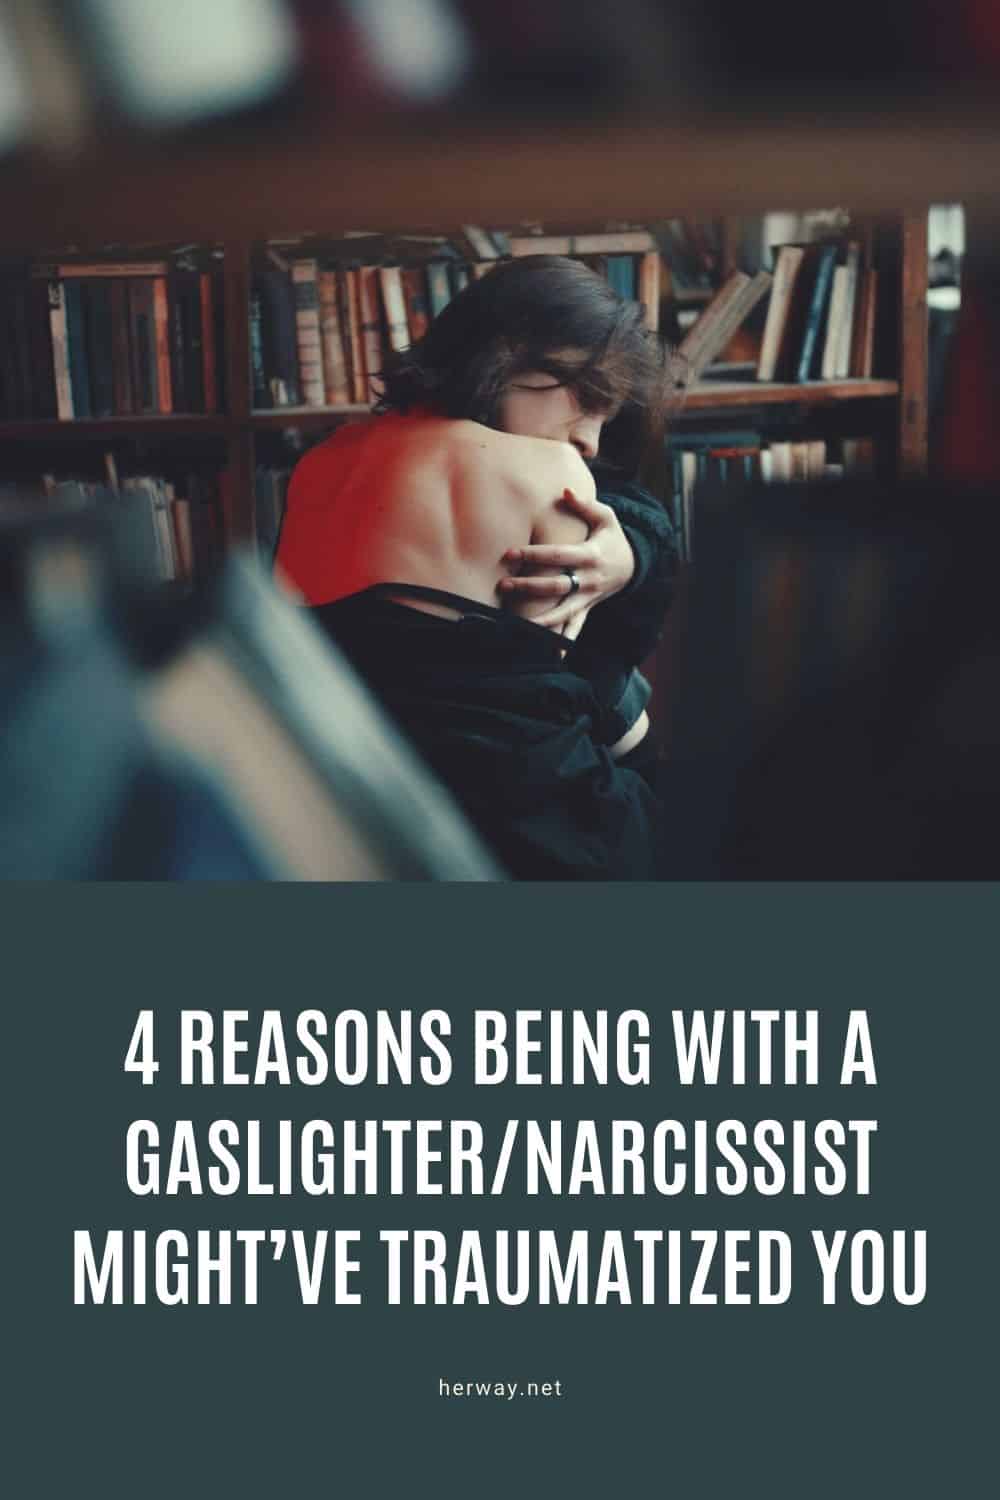 4 Reasons Being With A Gaslighter/Narcissist Might’ve Traumatized You